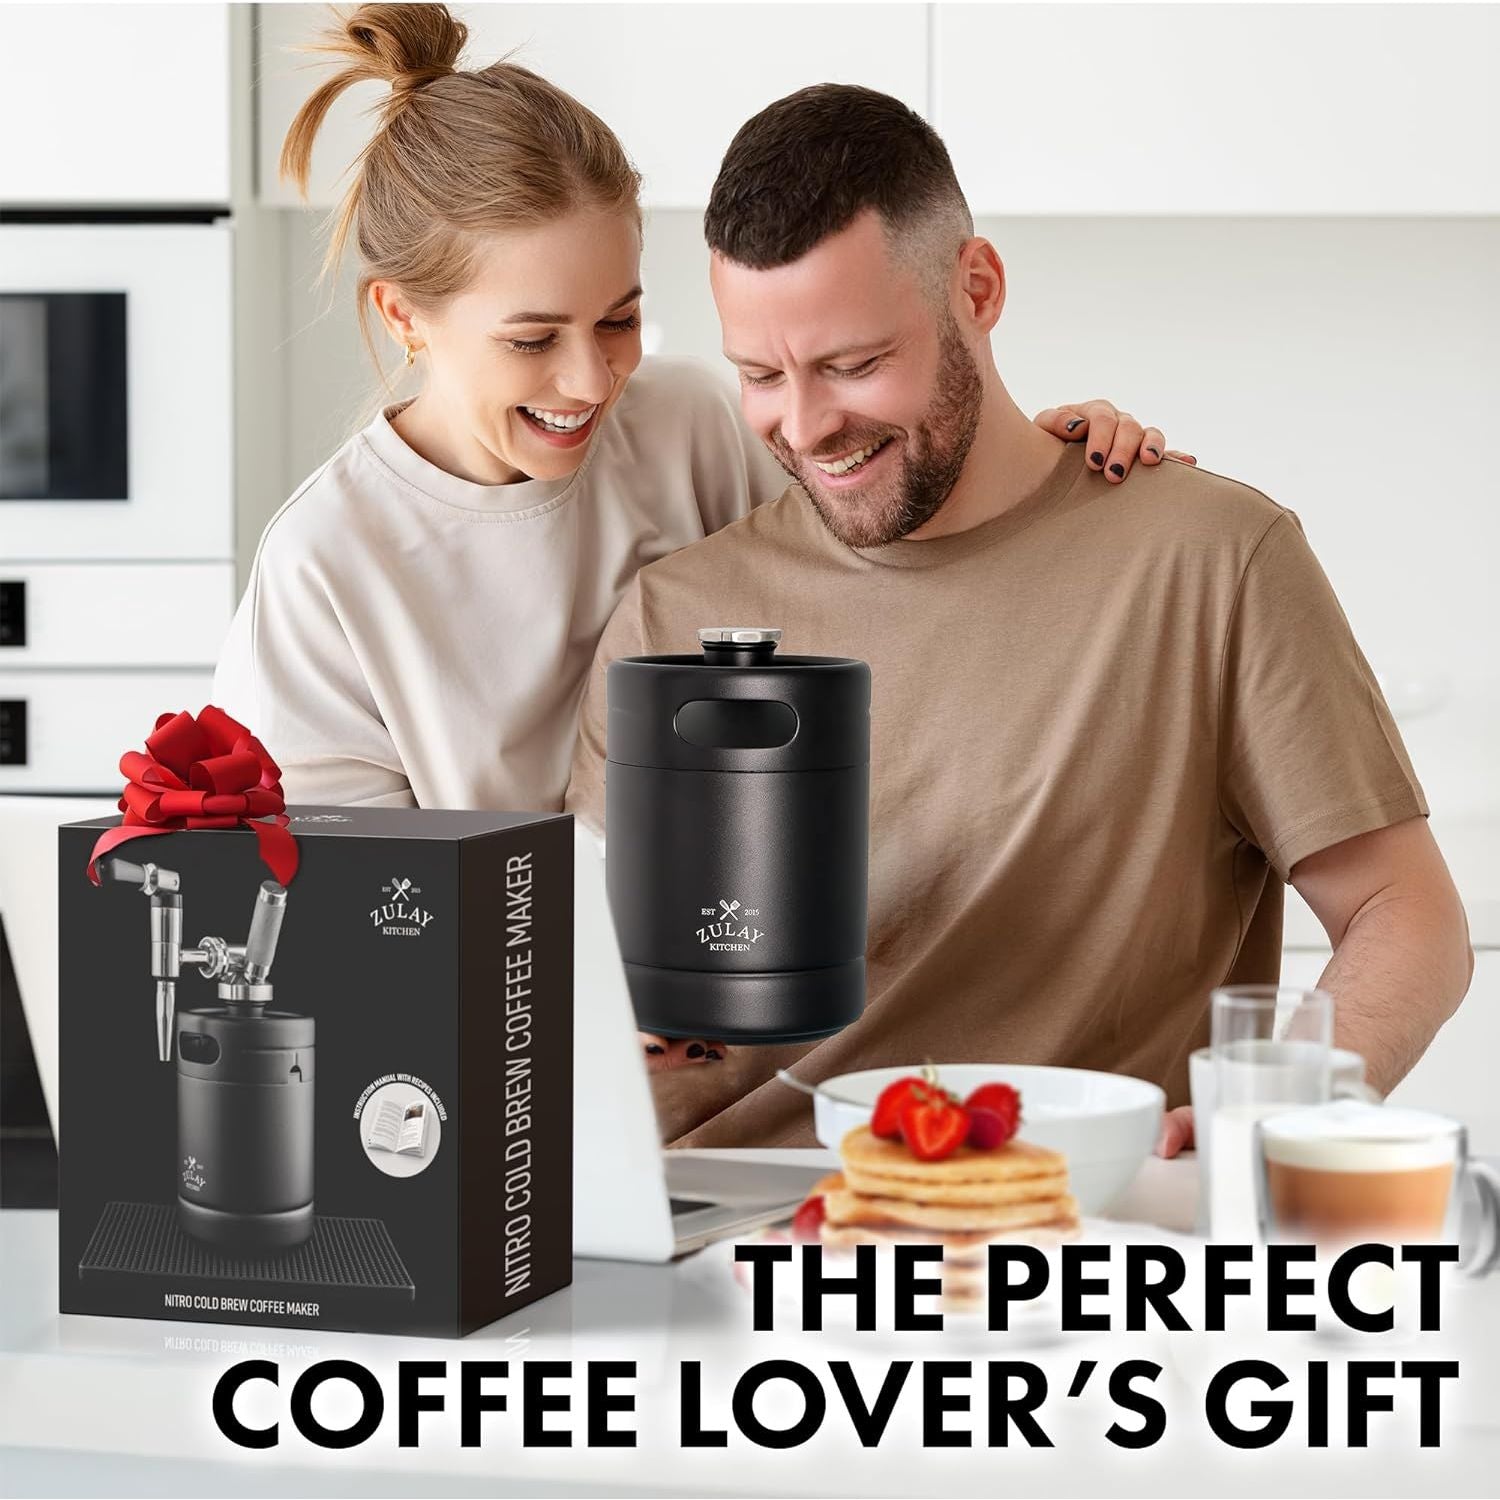 Cold brew coffee maker Online  Zulay Kitchen - Save Big Today